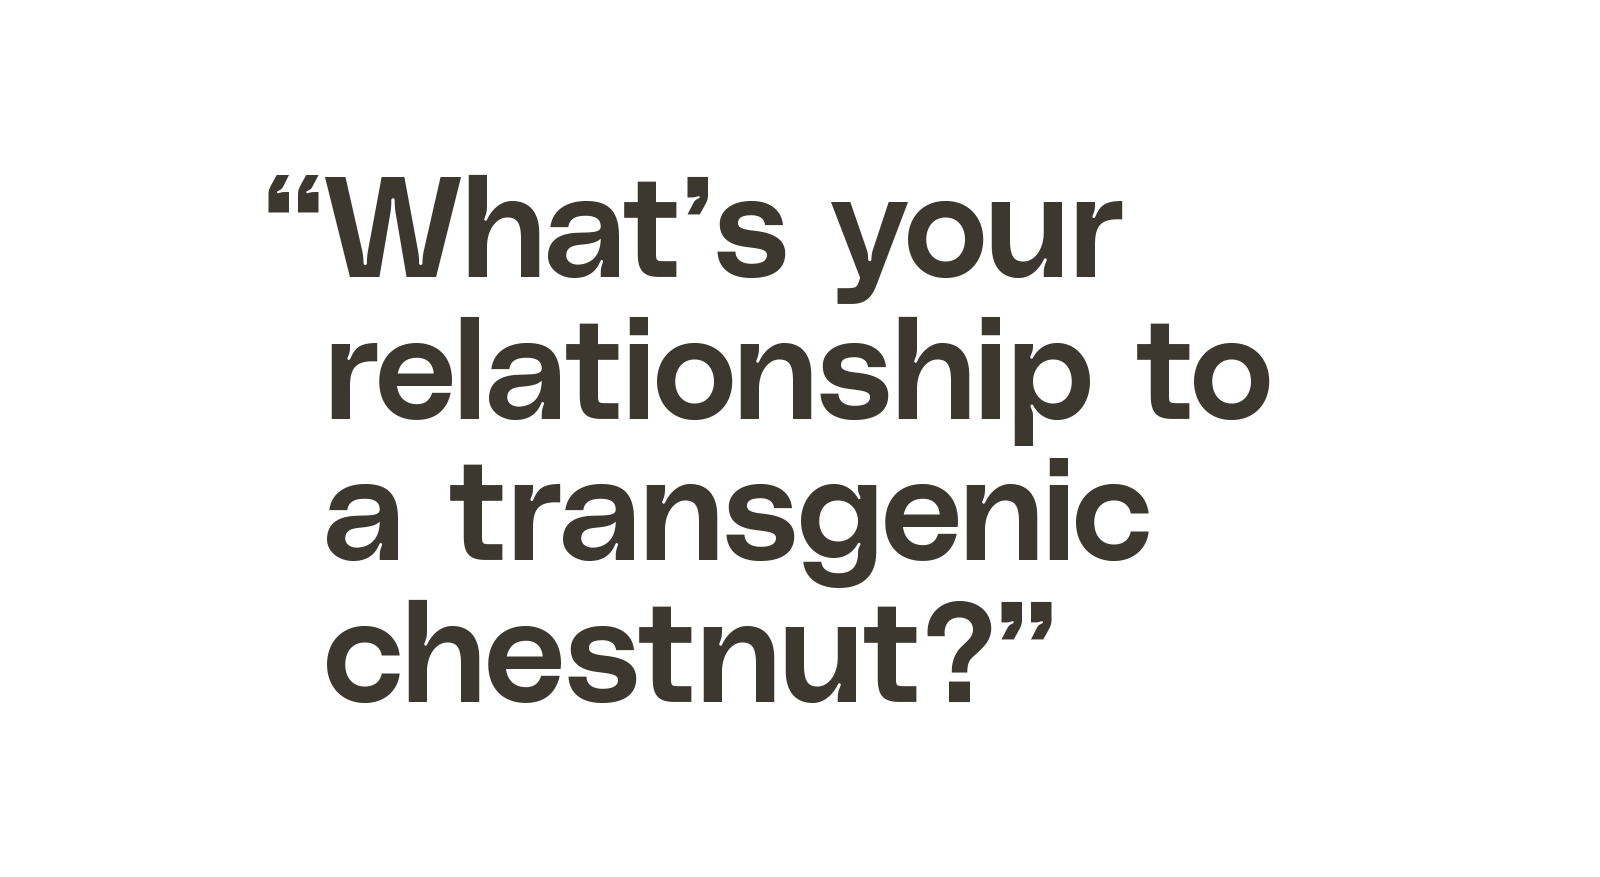 "What's your relationship to a transgenic chestnut?"